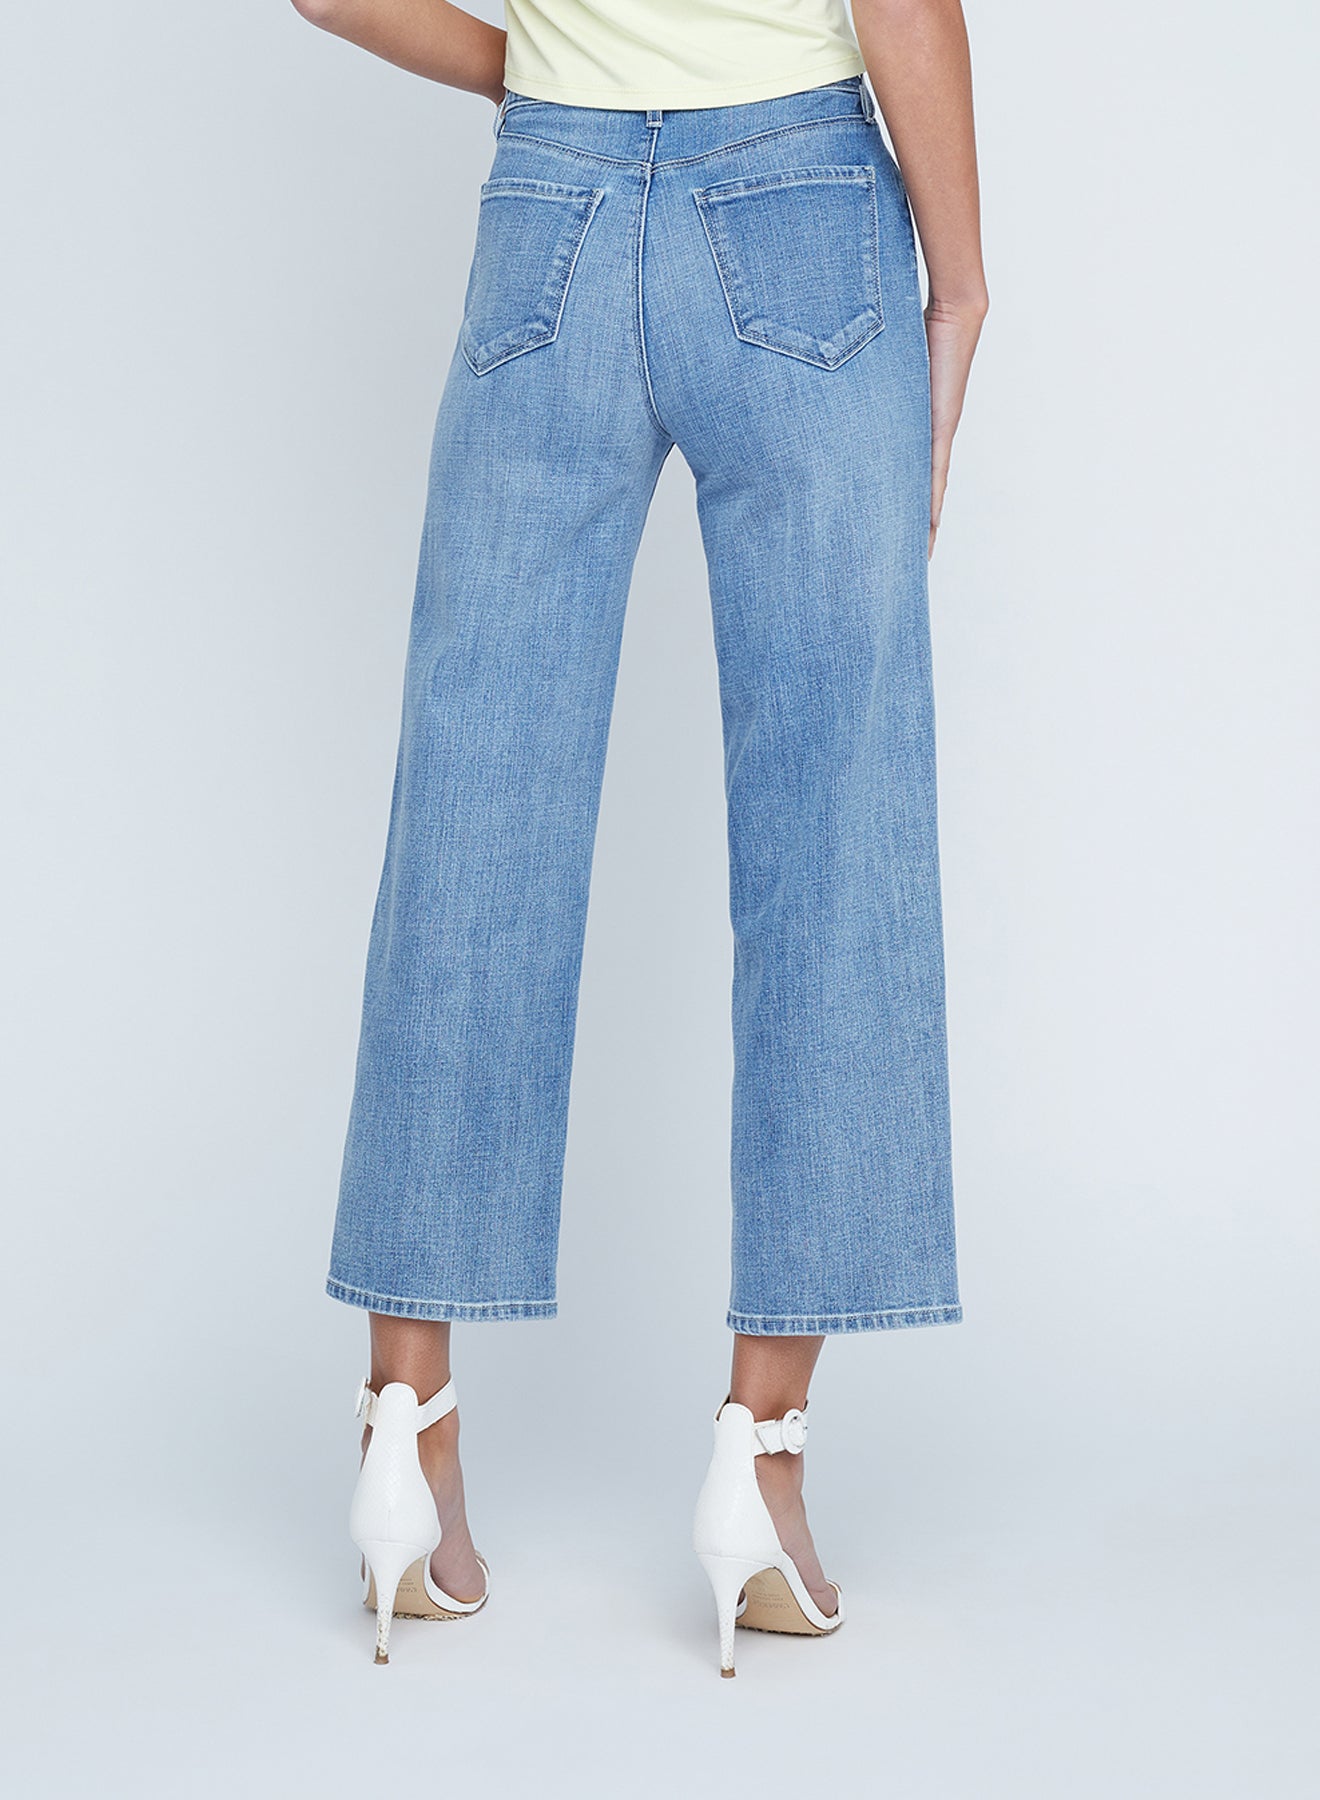 Lagence June Crop Stovepipe Jeans